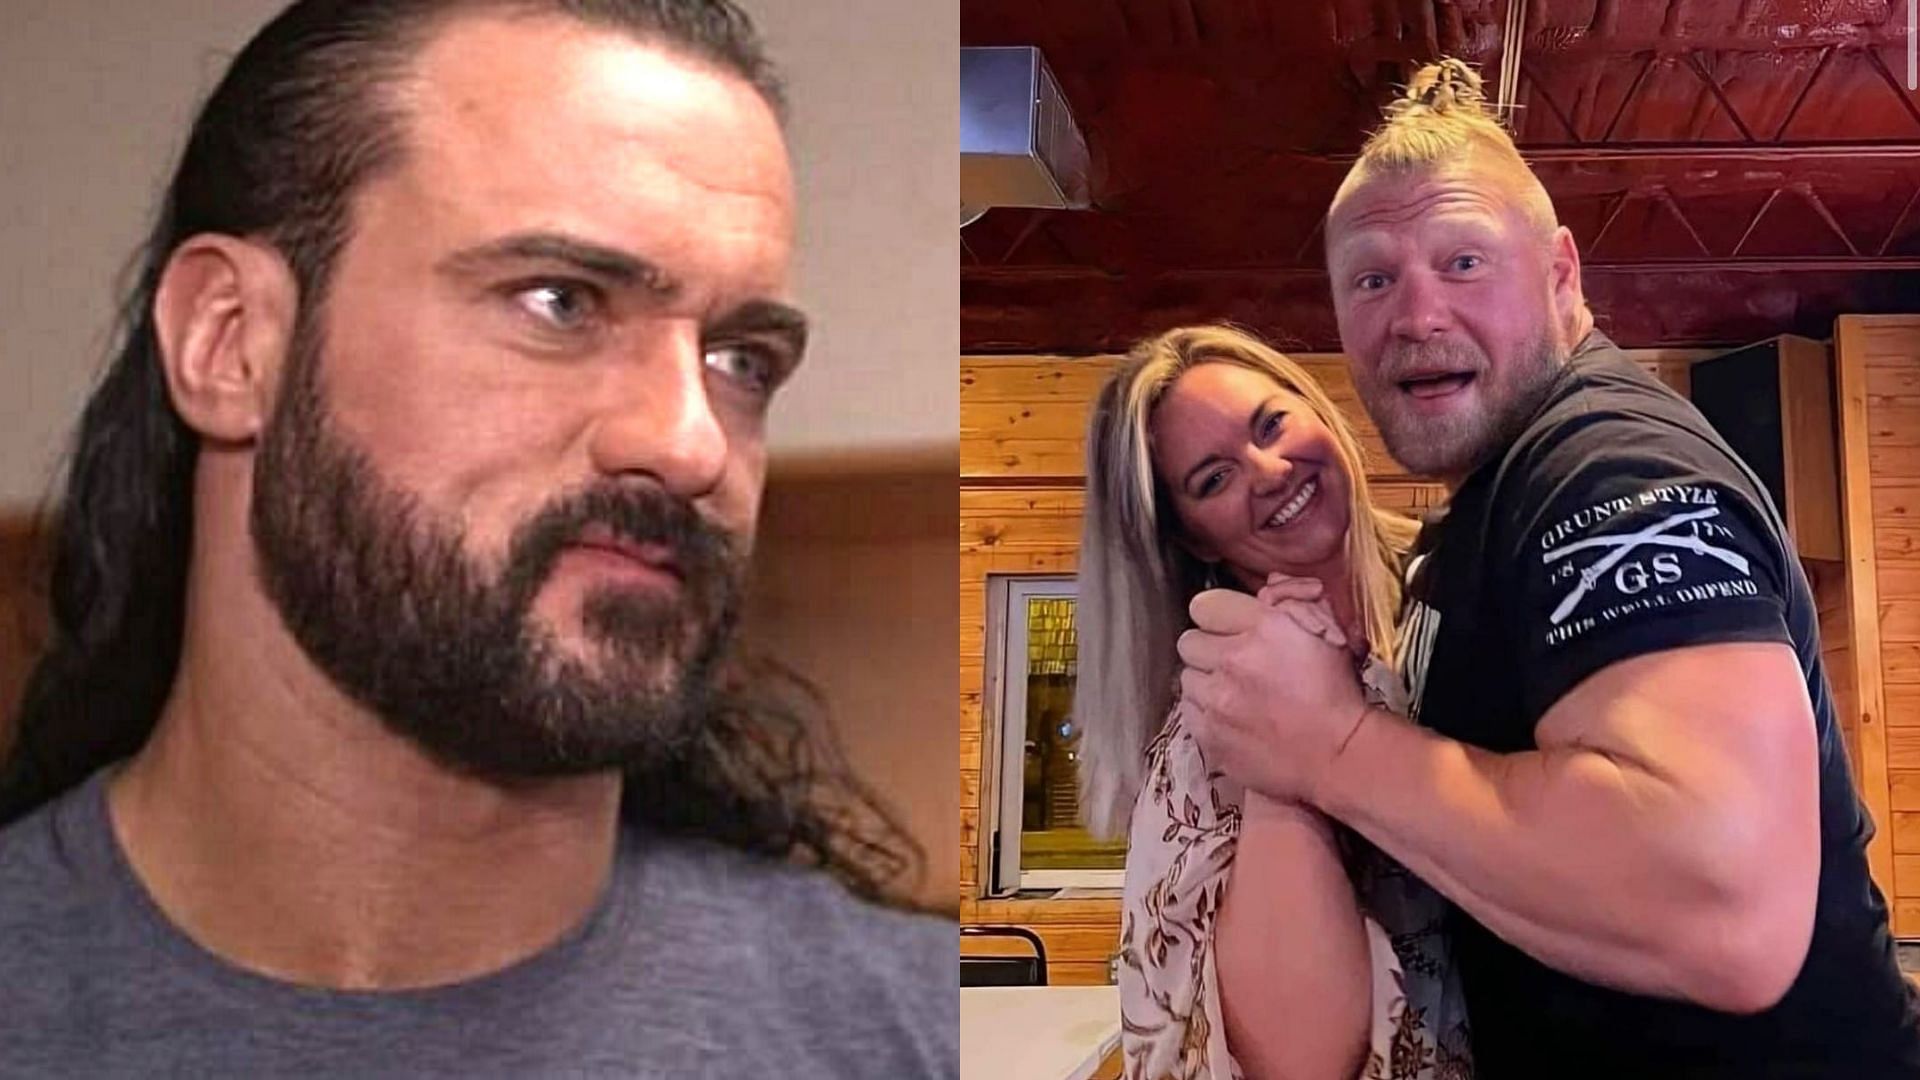 Drew McIntyre reacted to Brock Lesnar&#039;s new look and gimmick.